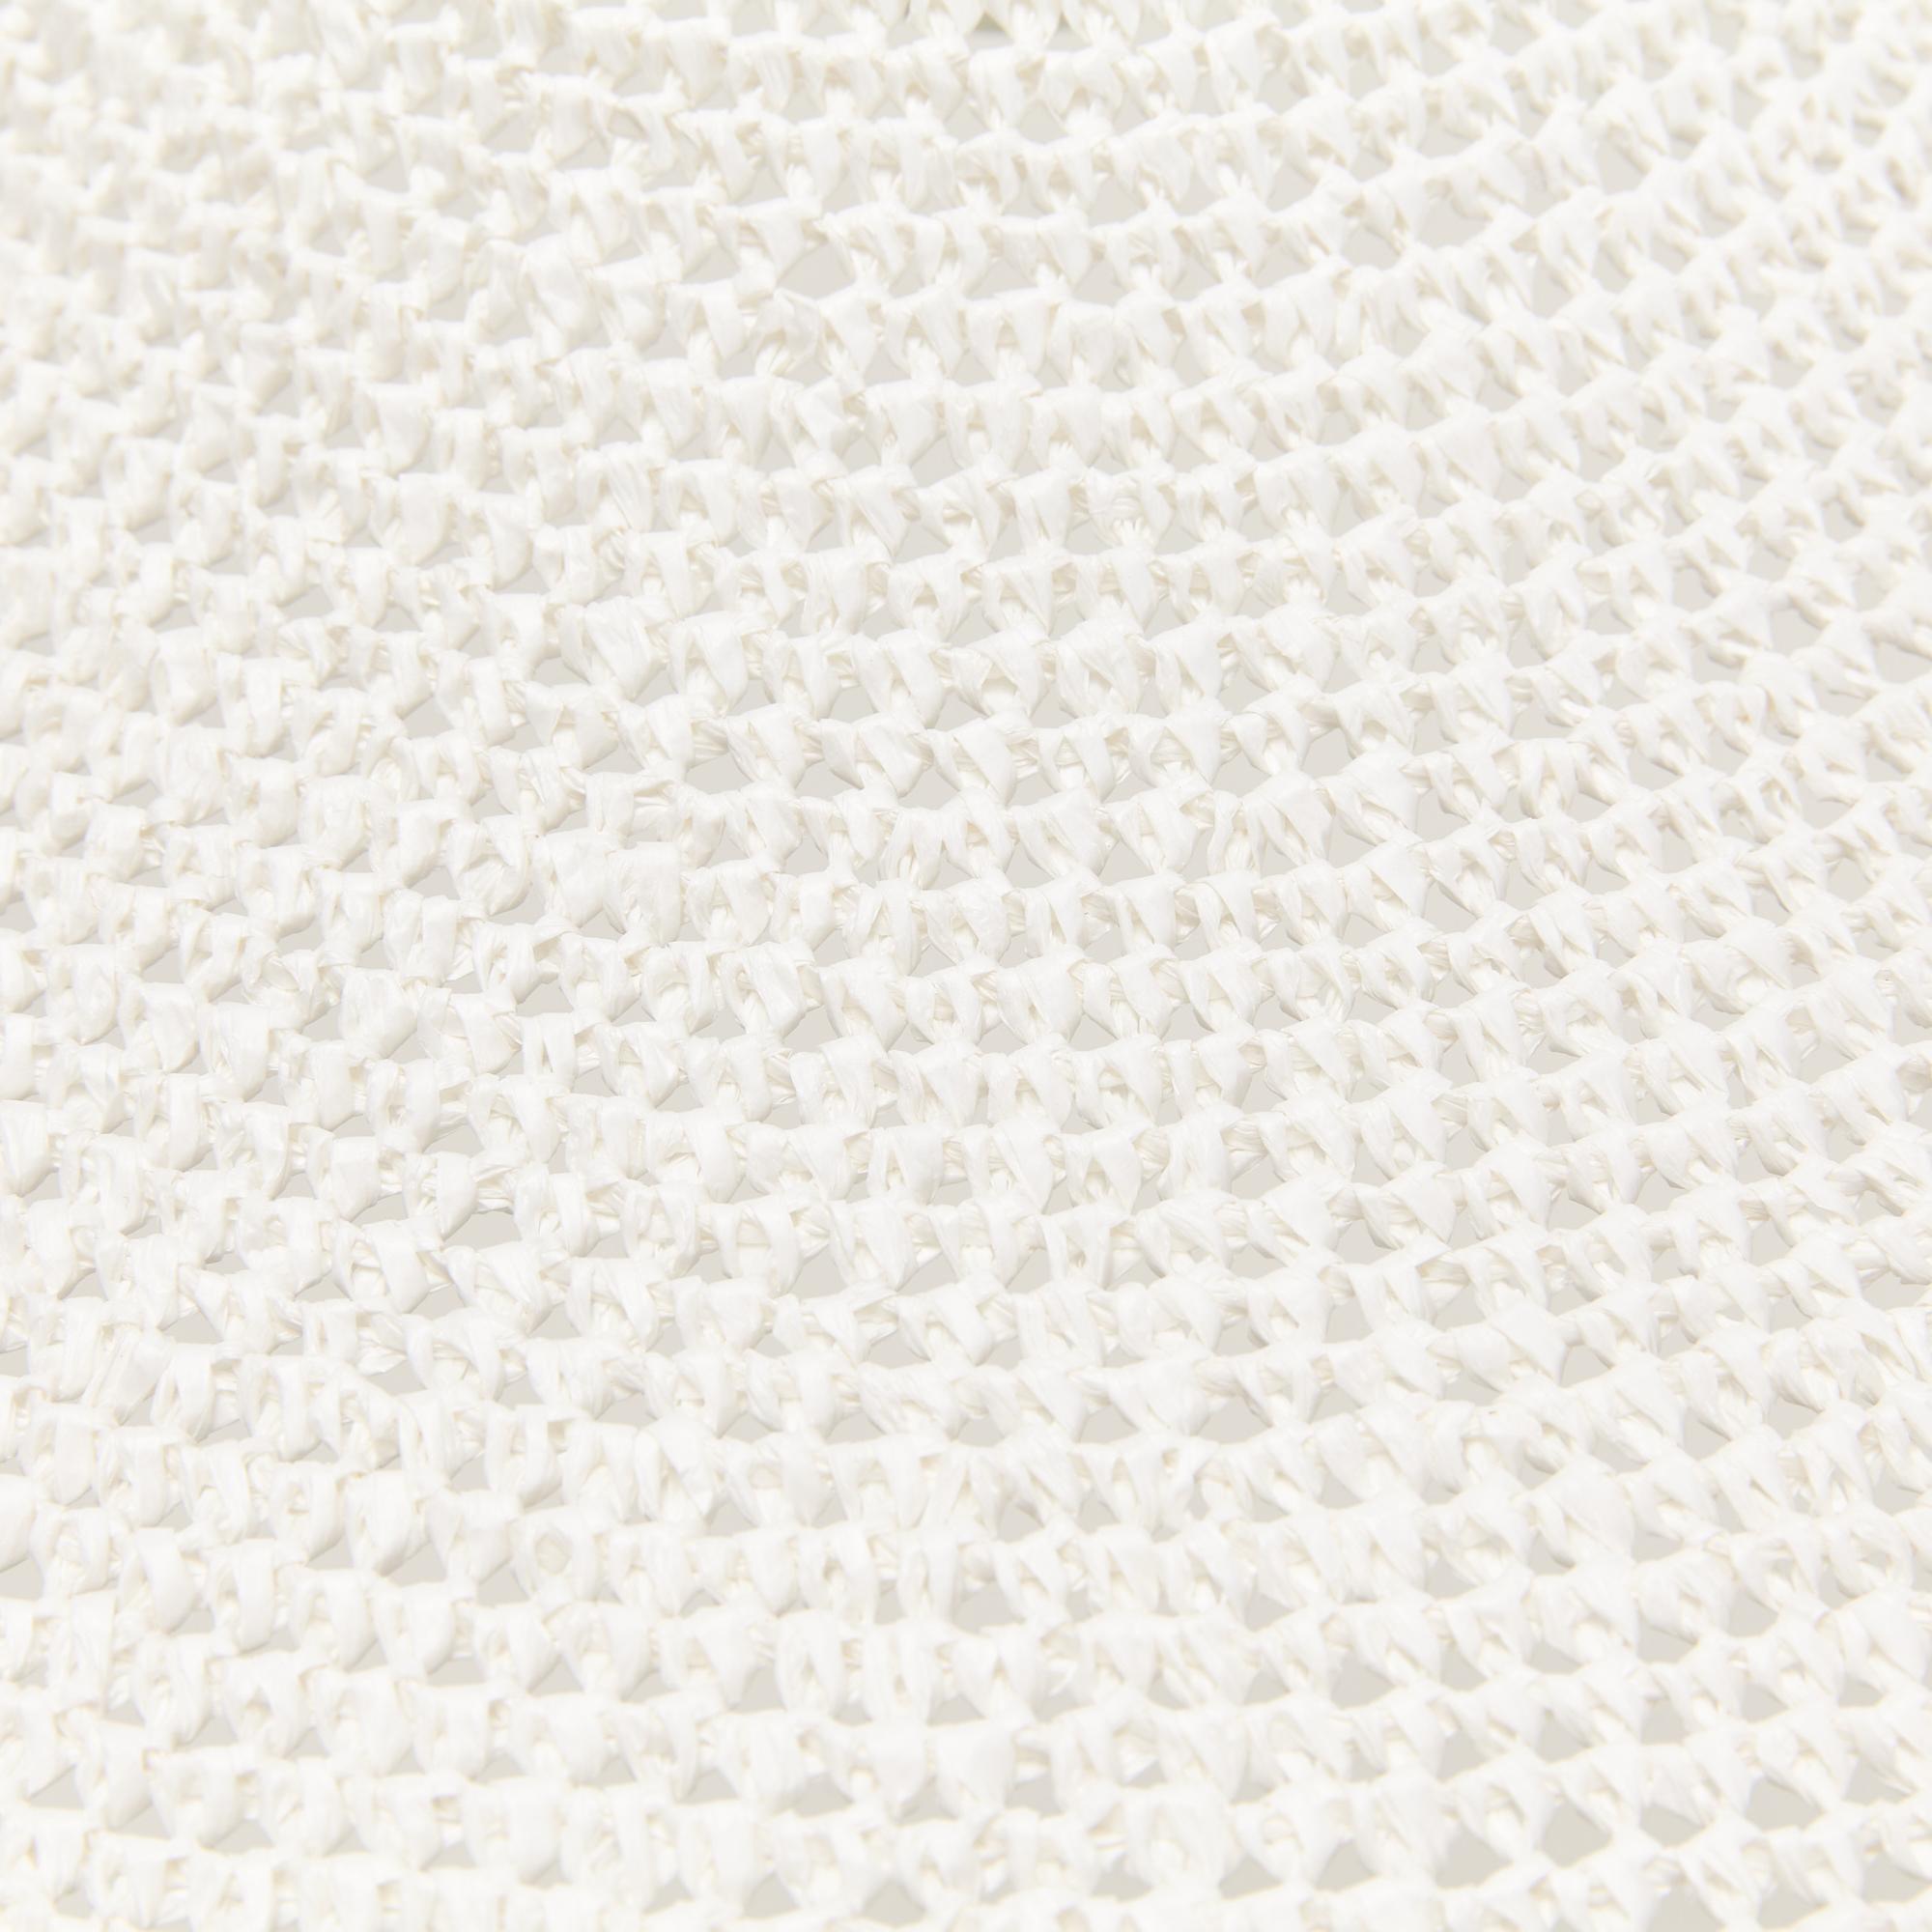 British SOLITAIRE 01 Pendant Light Ø80cm/31.5in, Hand Crocheted in Egyptian Cotton For Sale